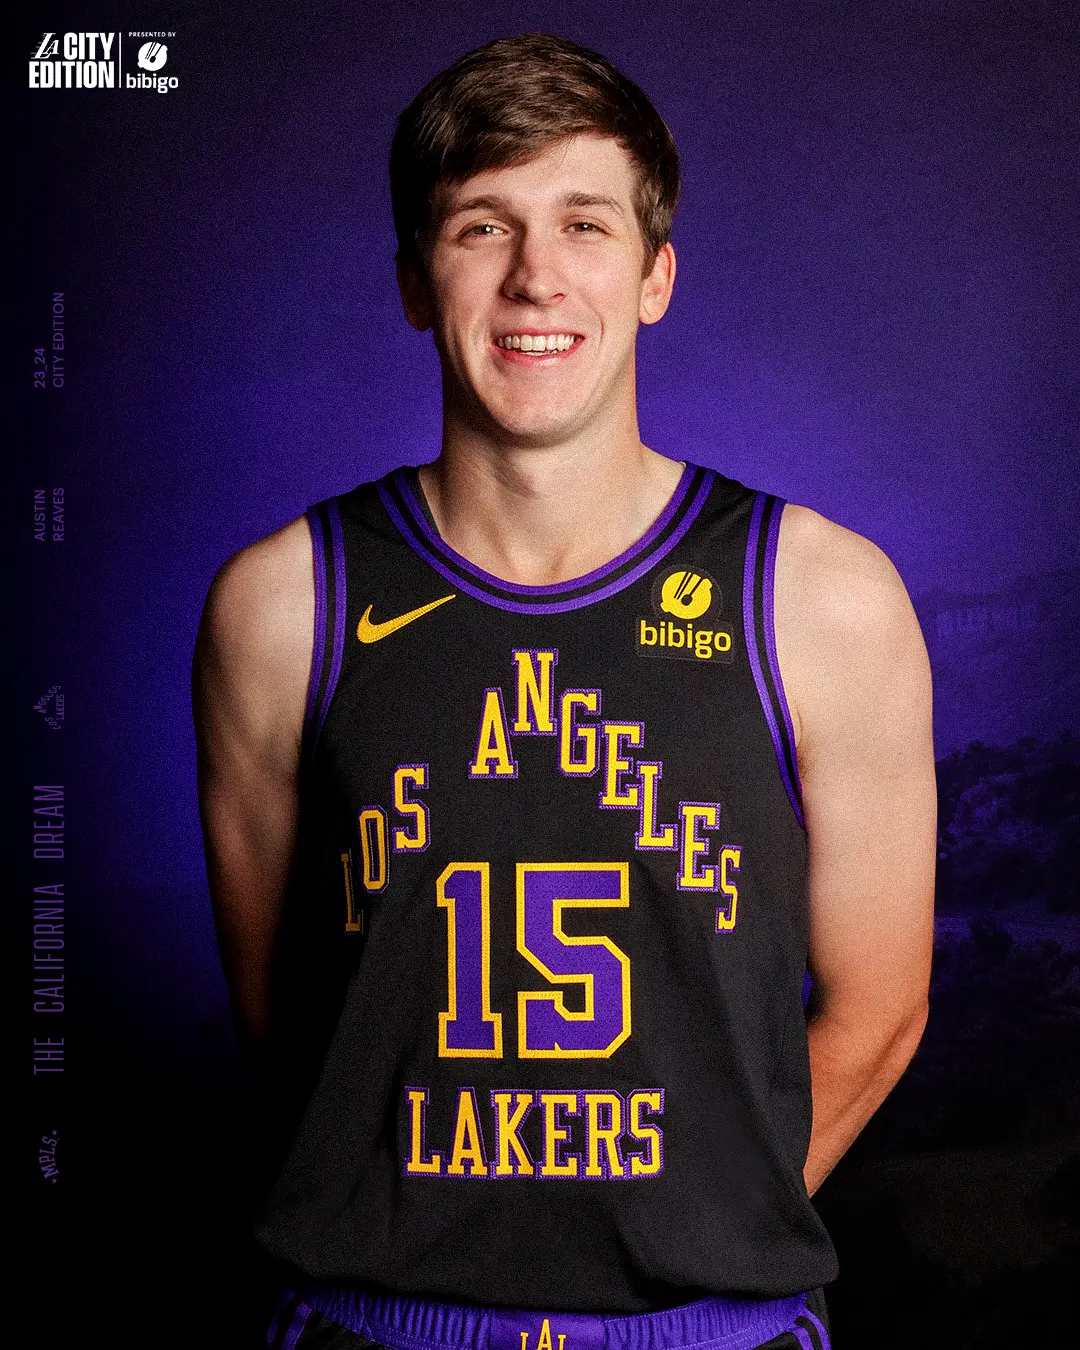 PHOTO GALLERY: Los Angeles Lakers launched a new jersey with black and purple as the main color